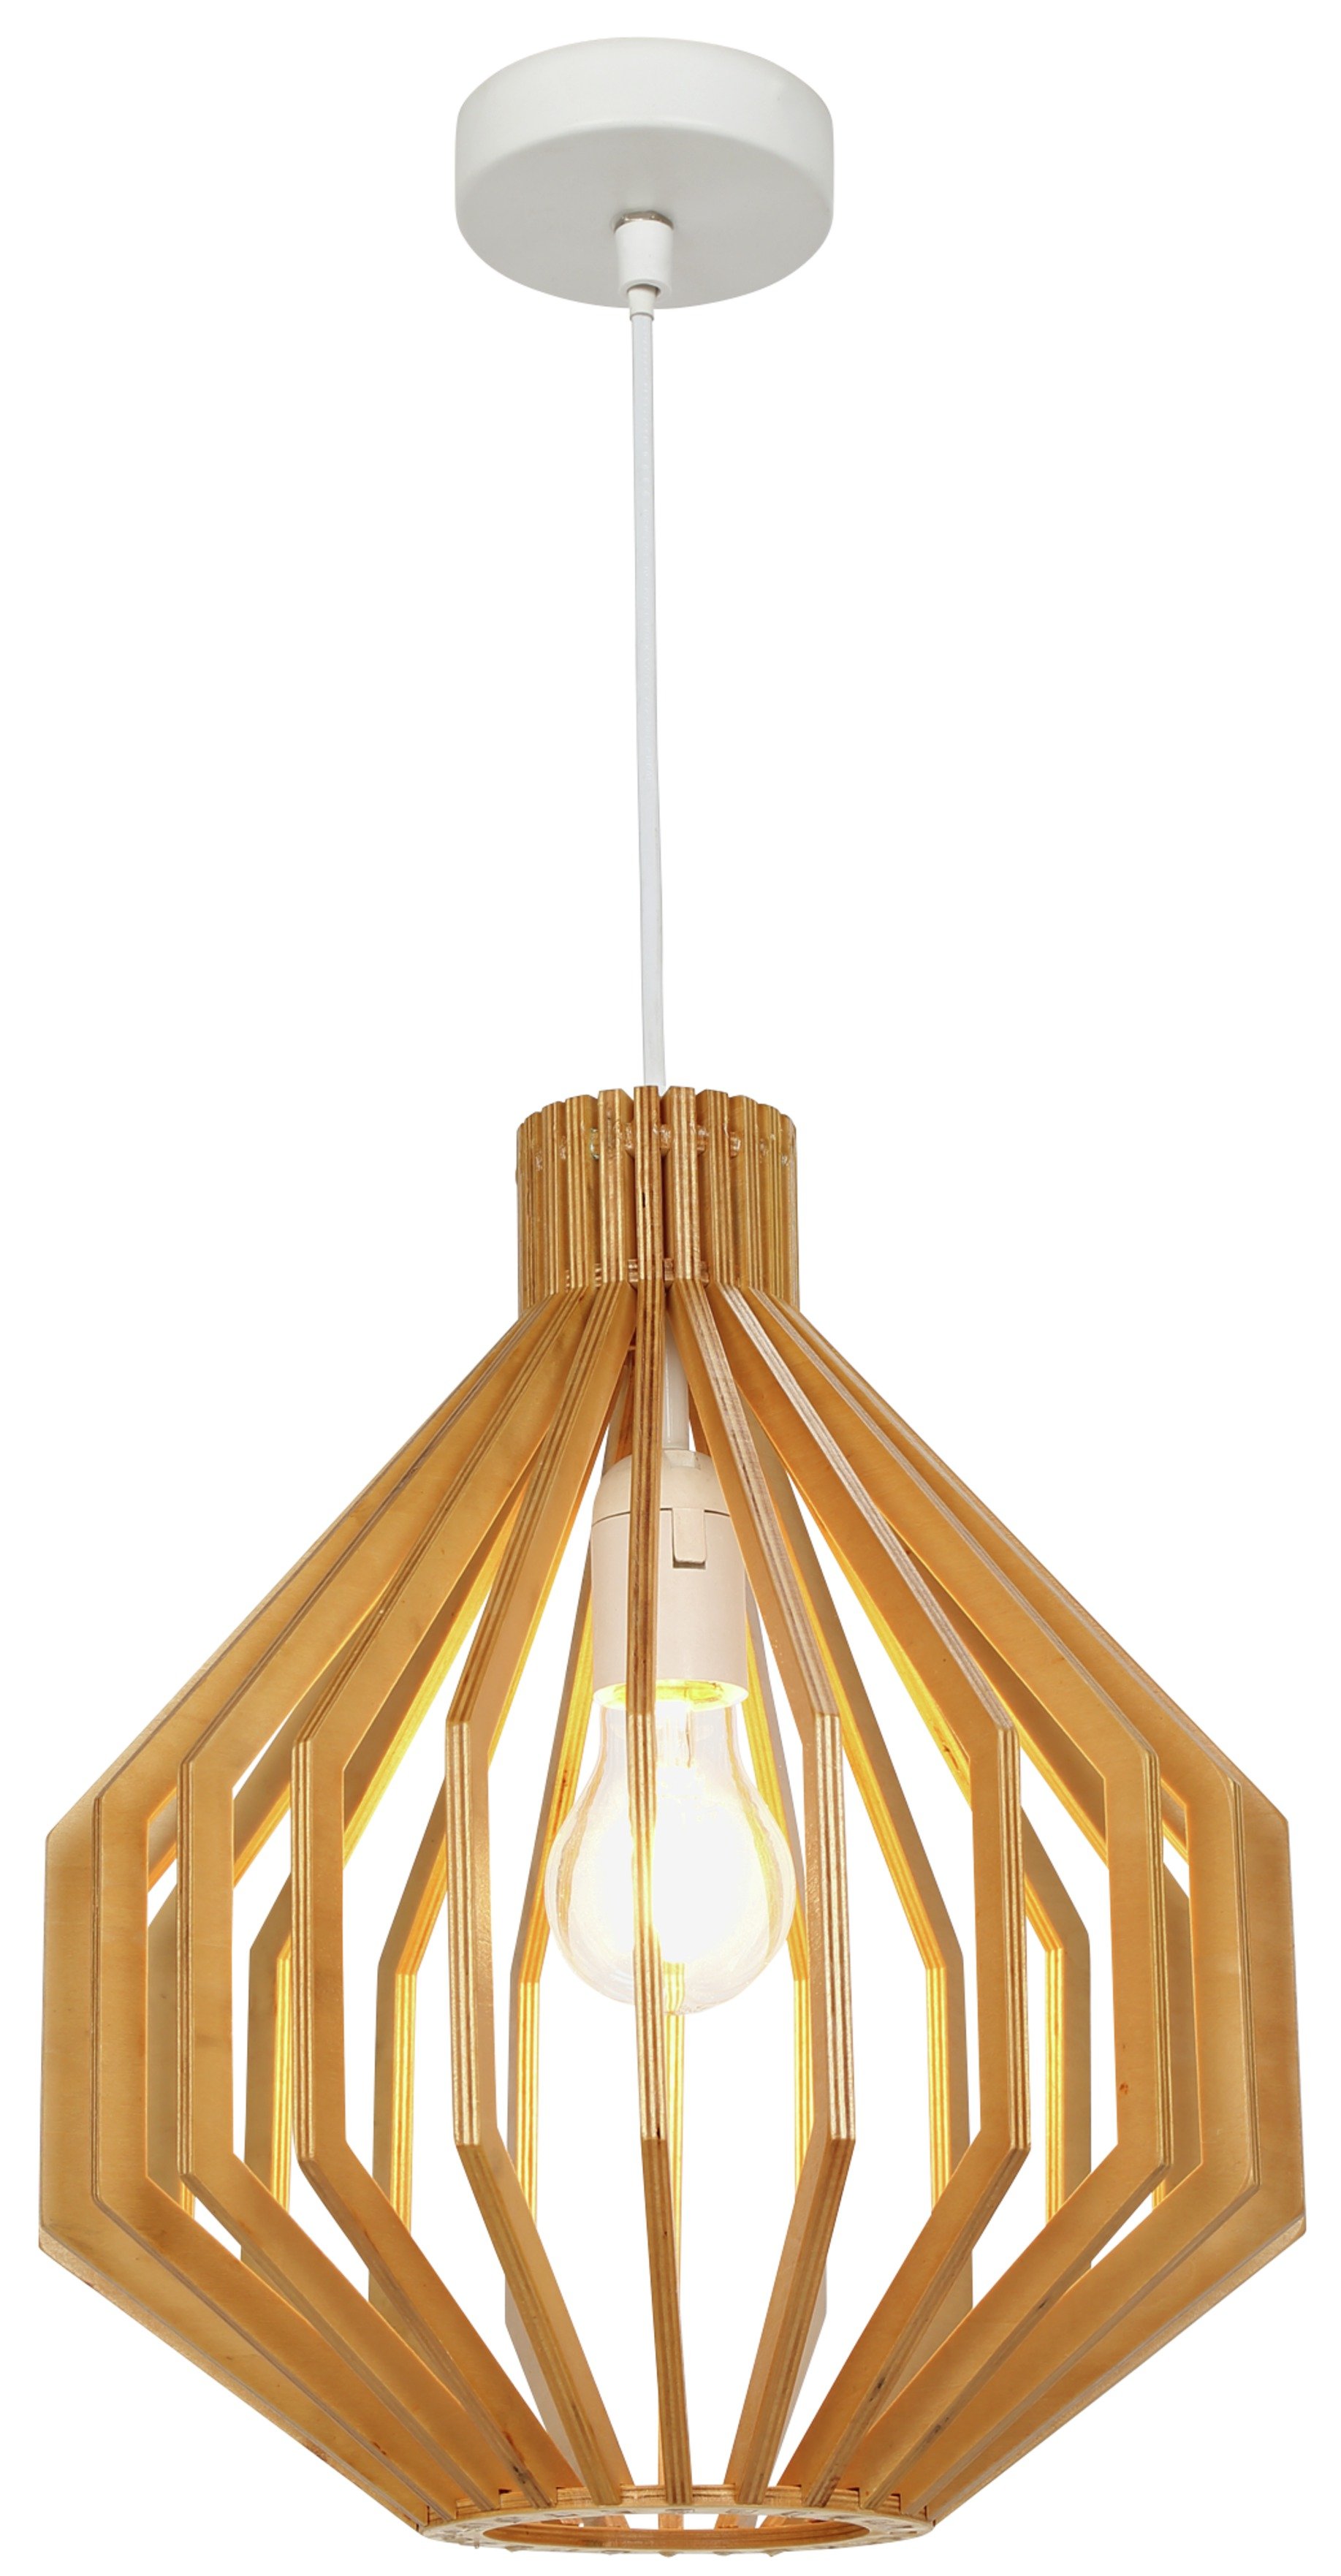 Argos Home Anders Wooden Pendant Ceiling Light